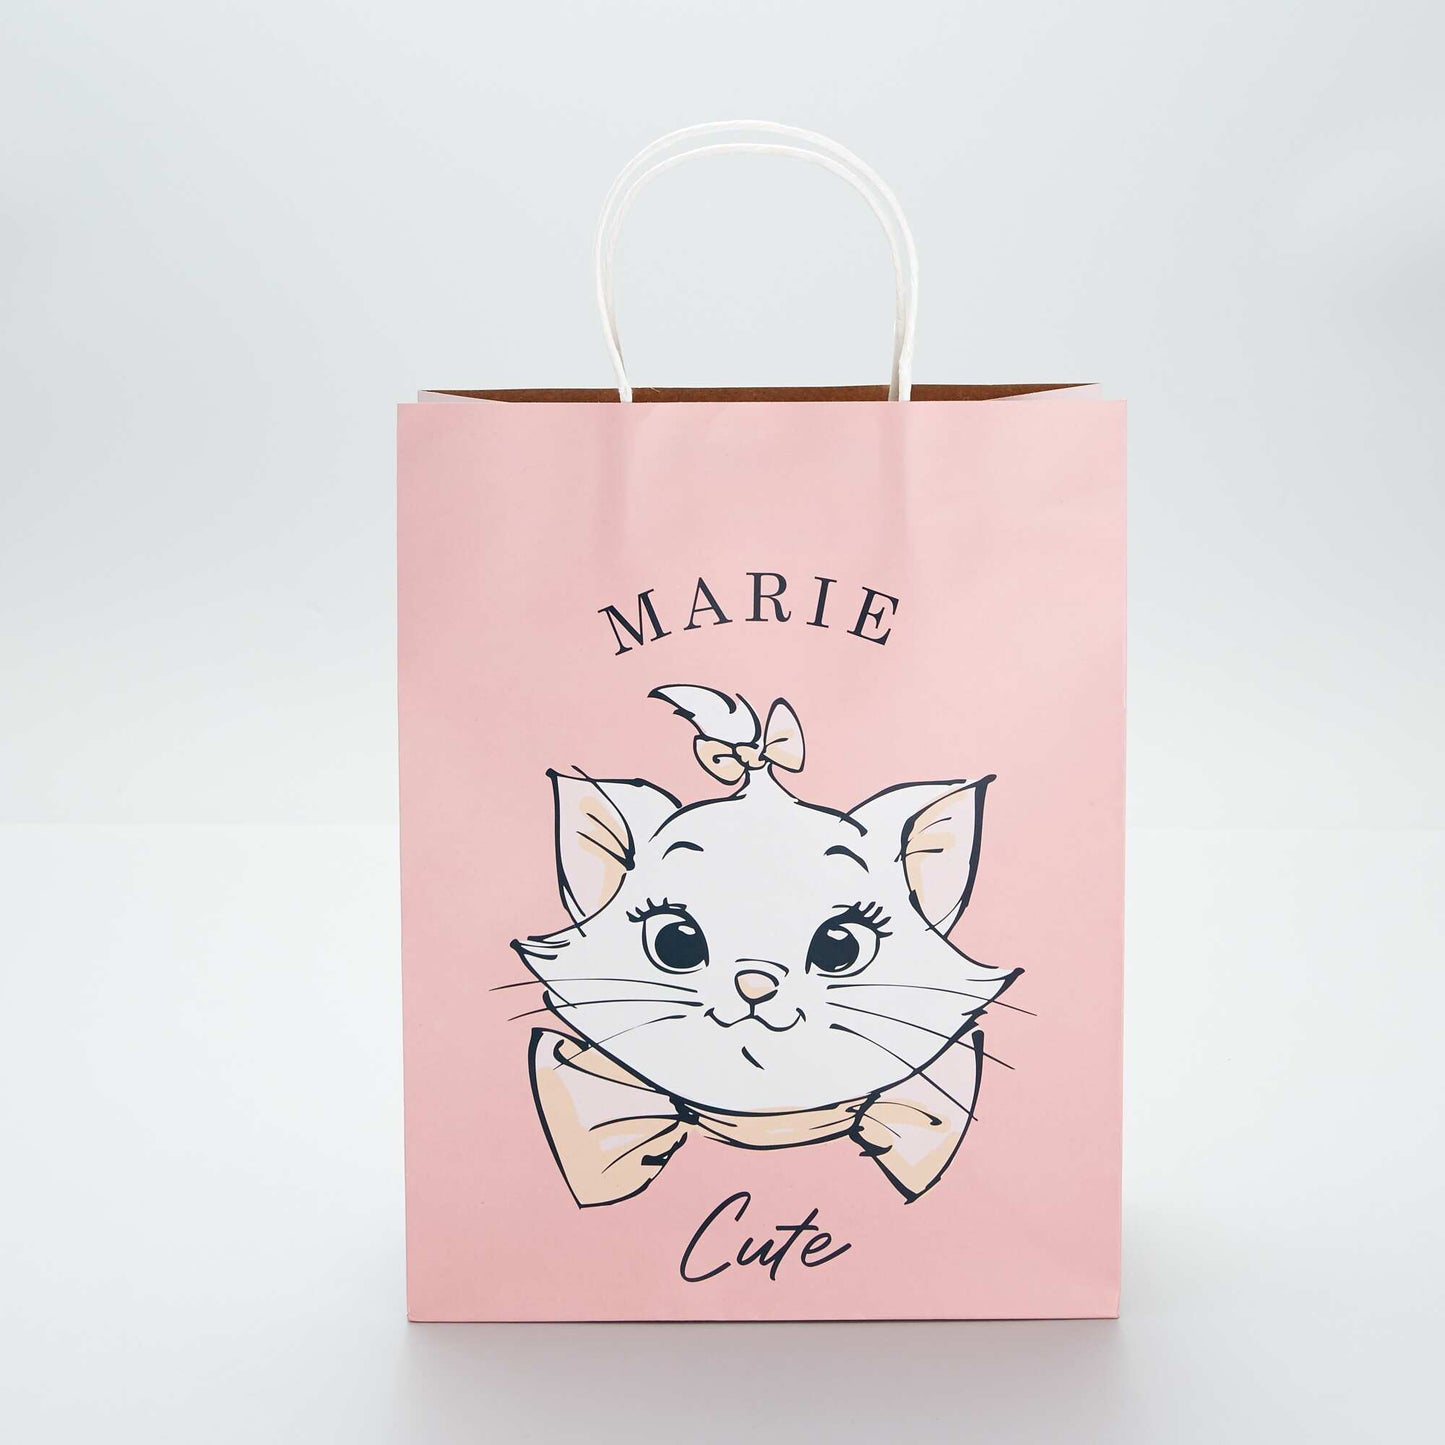 'The Aristocats' 'Marie' gift bag PINK